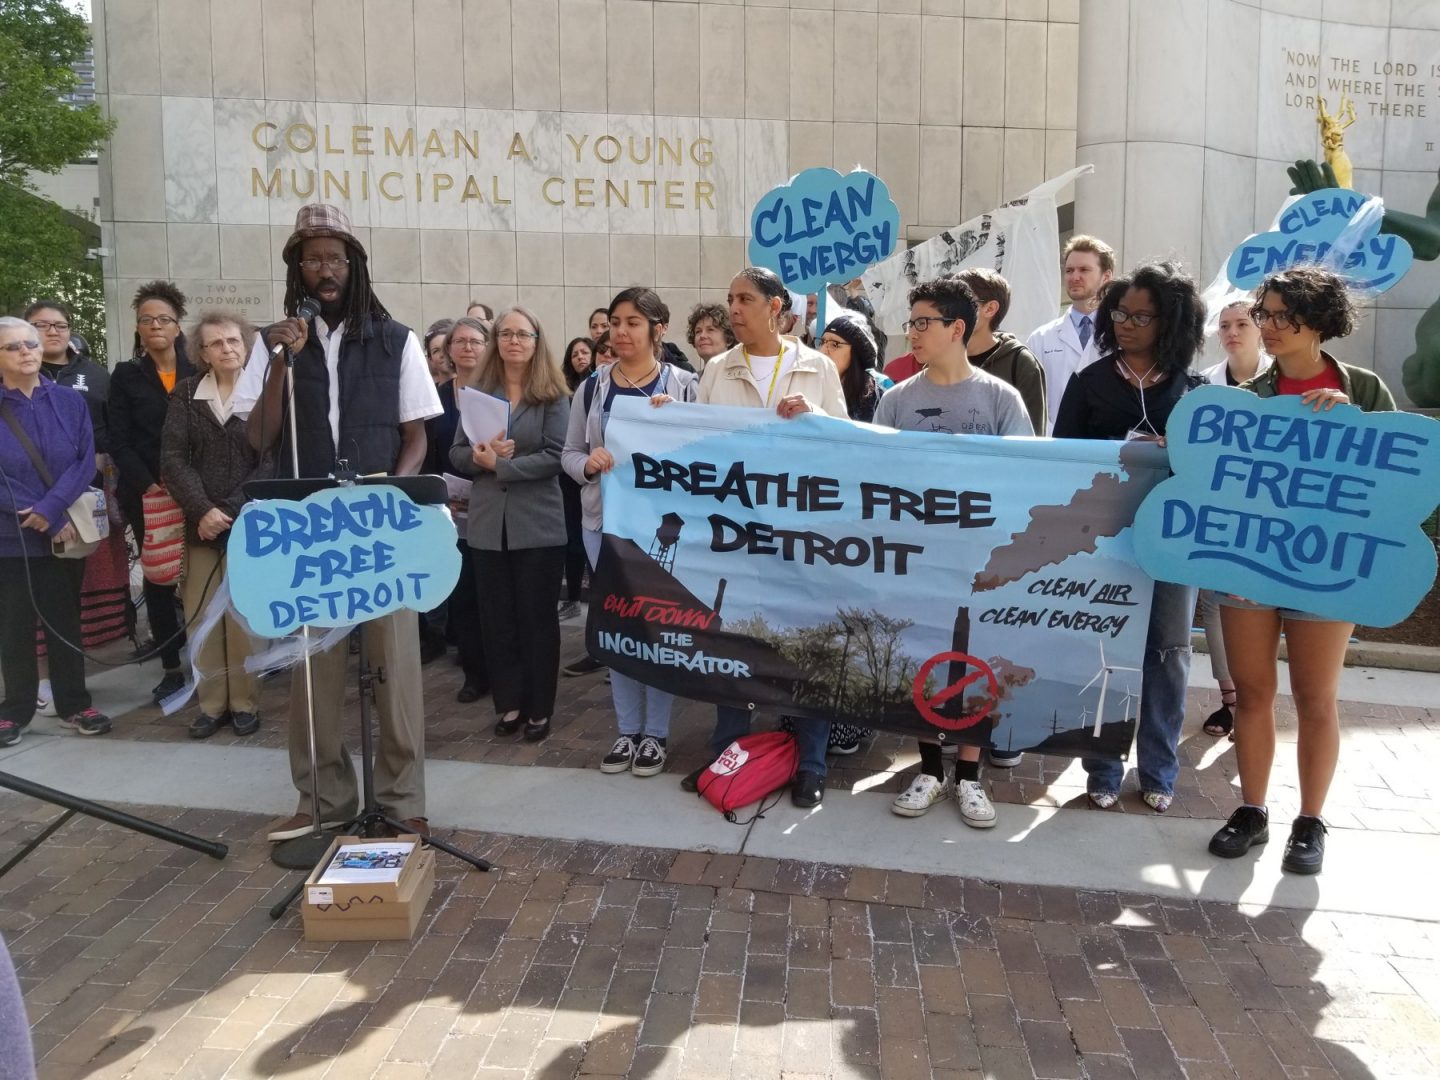 Supporters for Breathe Free Detroit gathered around a man with a microphone.